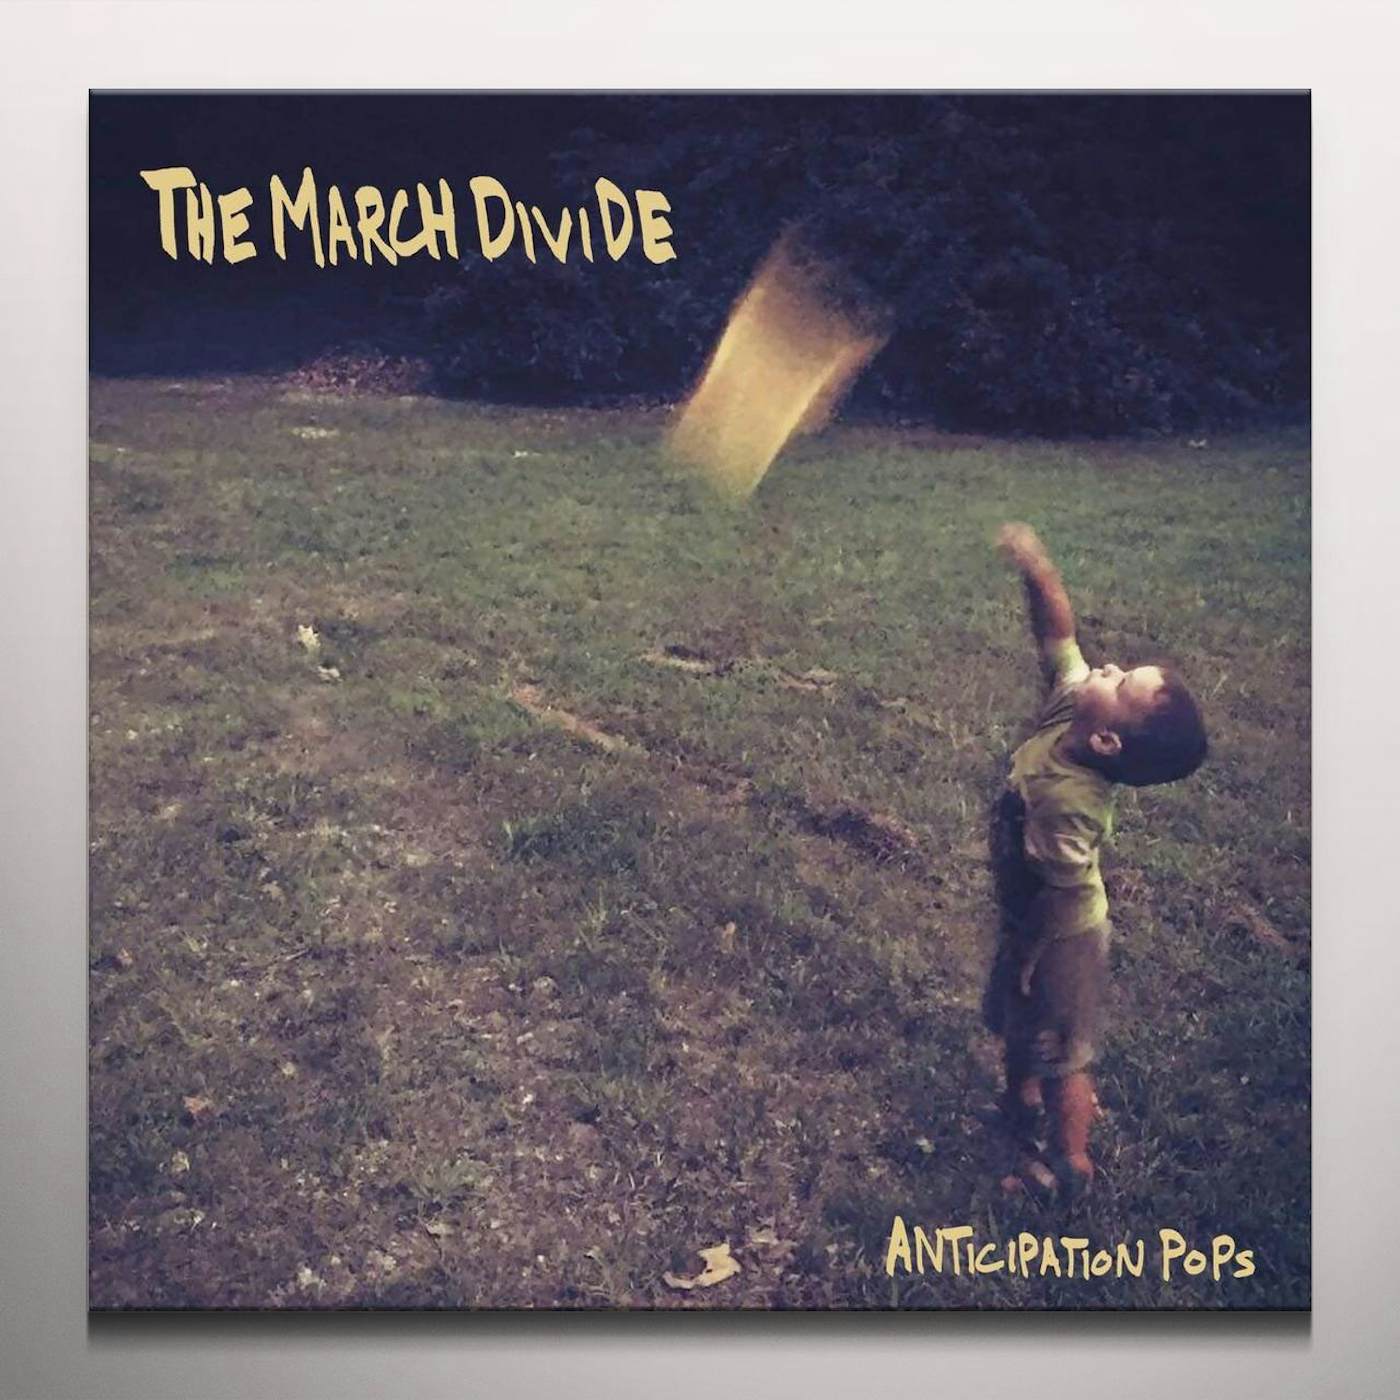 The March Divide Anticipation Pops Vinyl Record